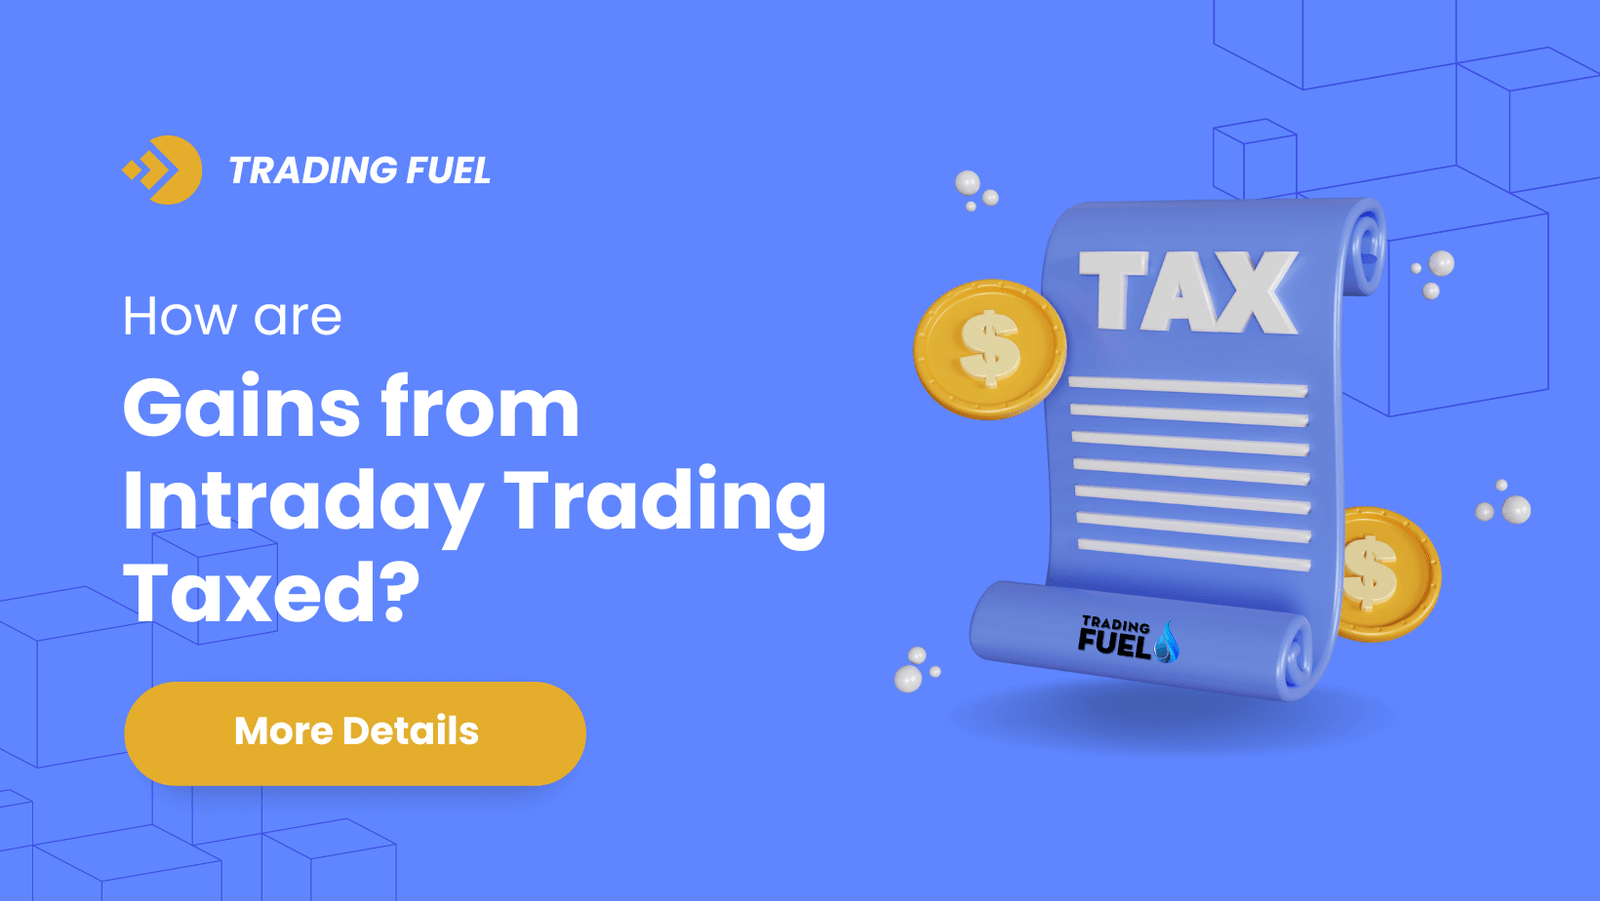 How are Gains from Intraday Trading Taxed?